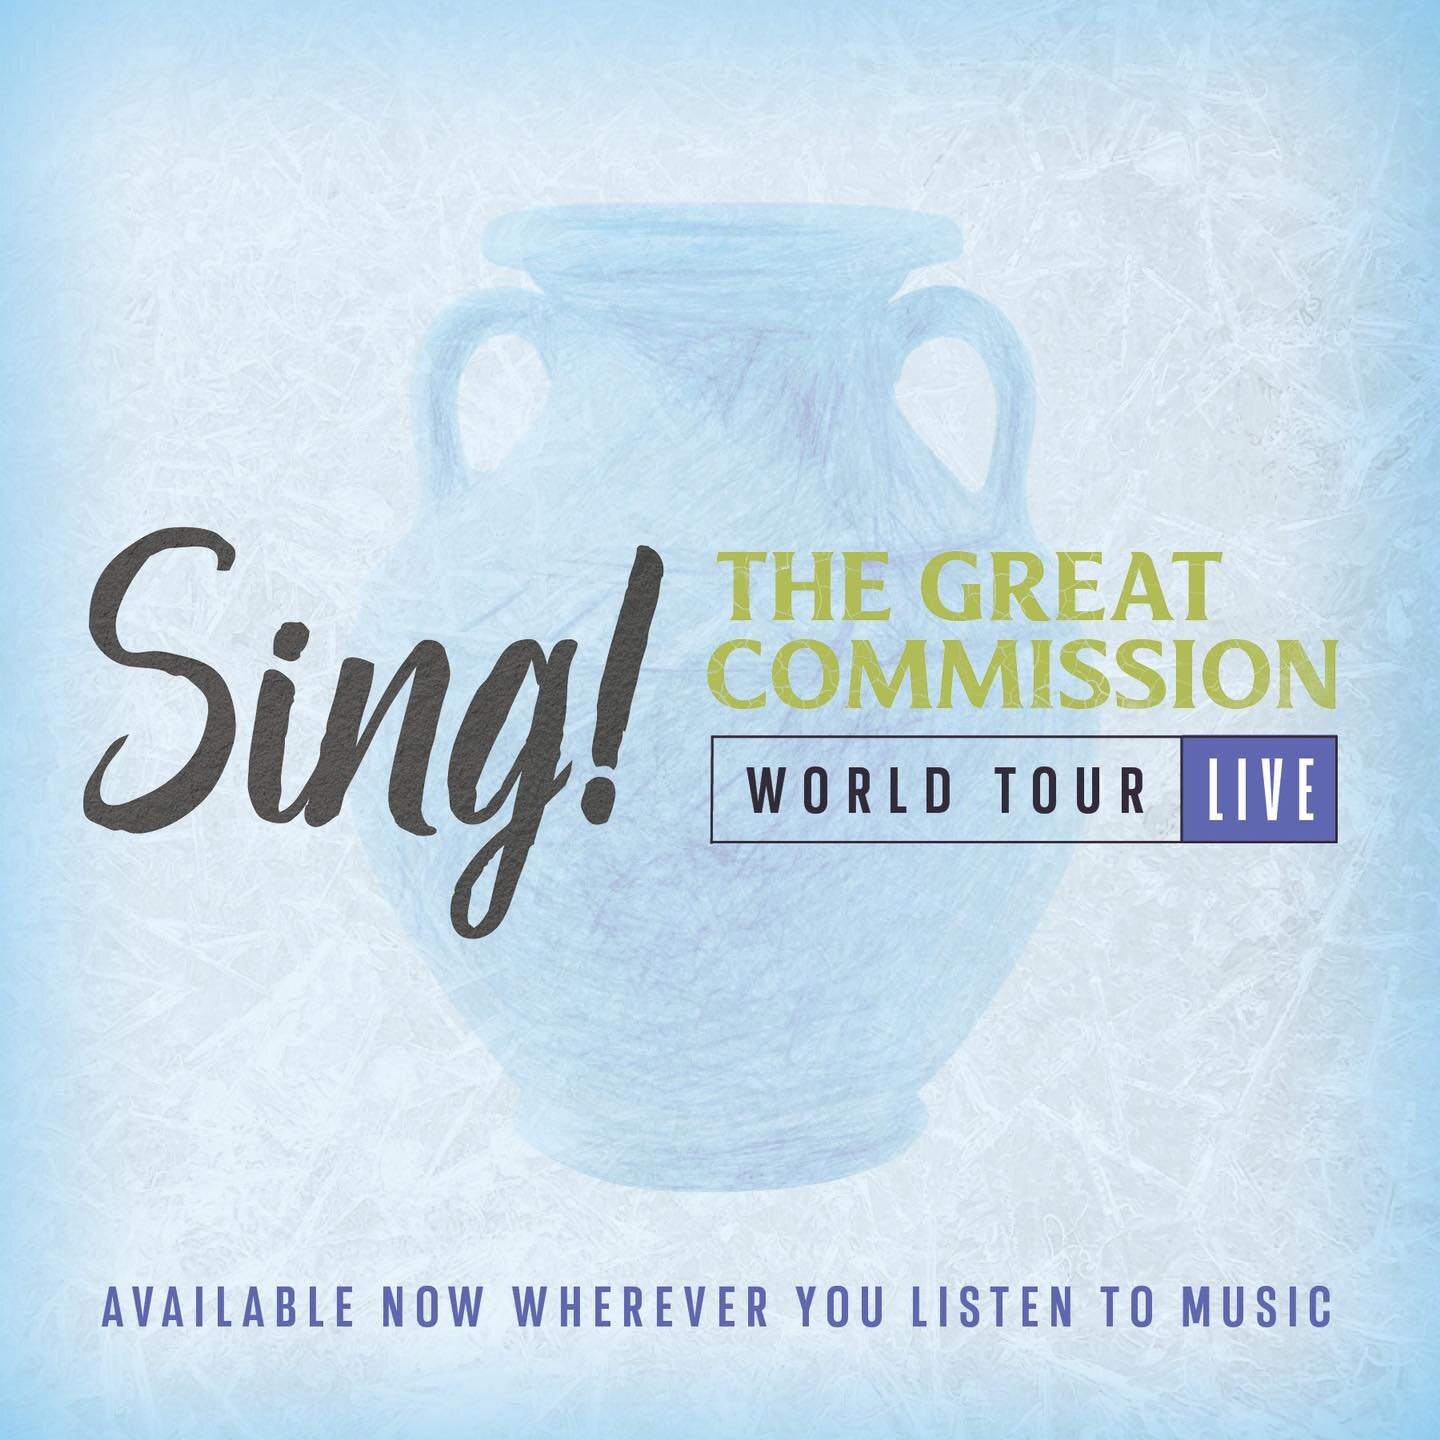 Last summer, we were honored to sing with more than 20,000 believers in four cities across four continents &mdash; Belfast, Singapore, Sidney, and Nashville &mdash; as part of the inaugural Sing! World Tour. Today we're excited to invite you into tha